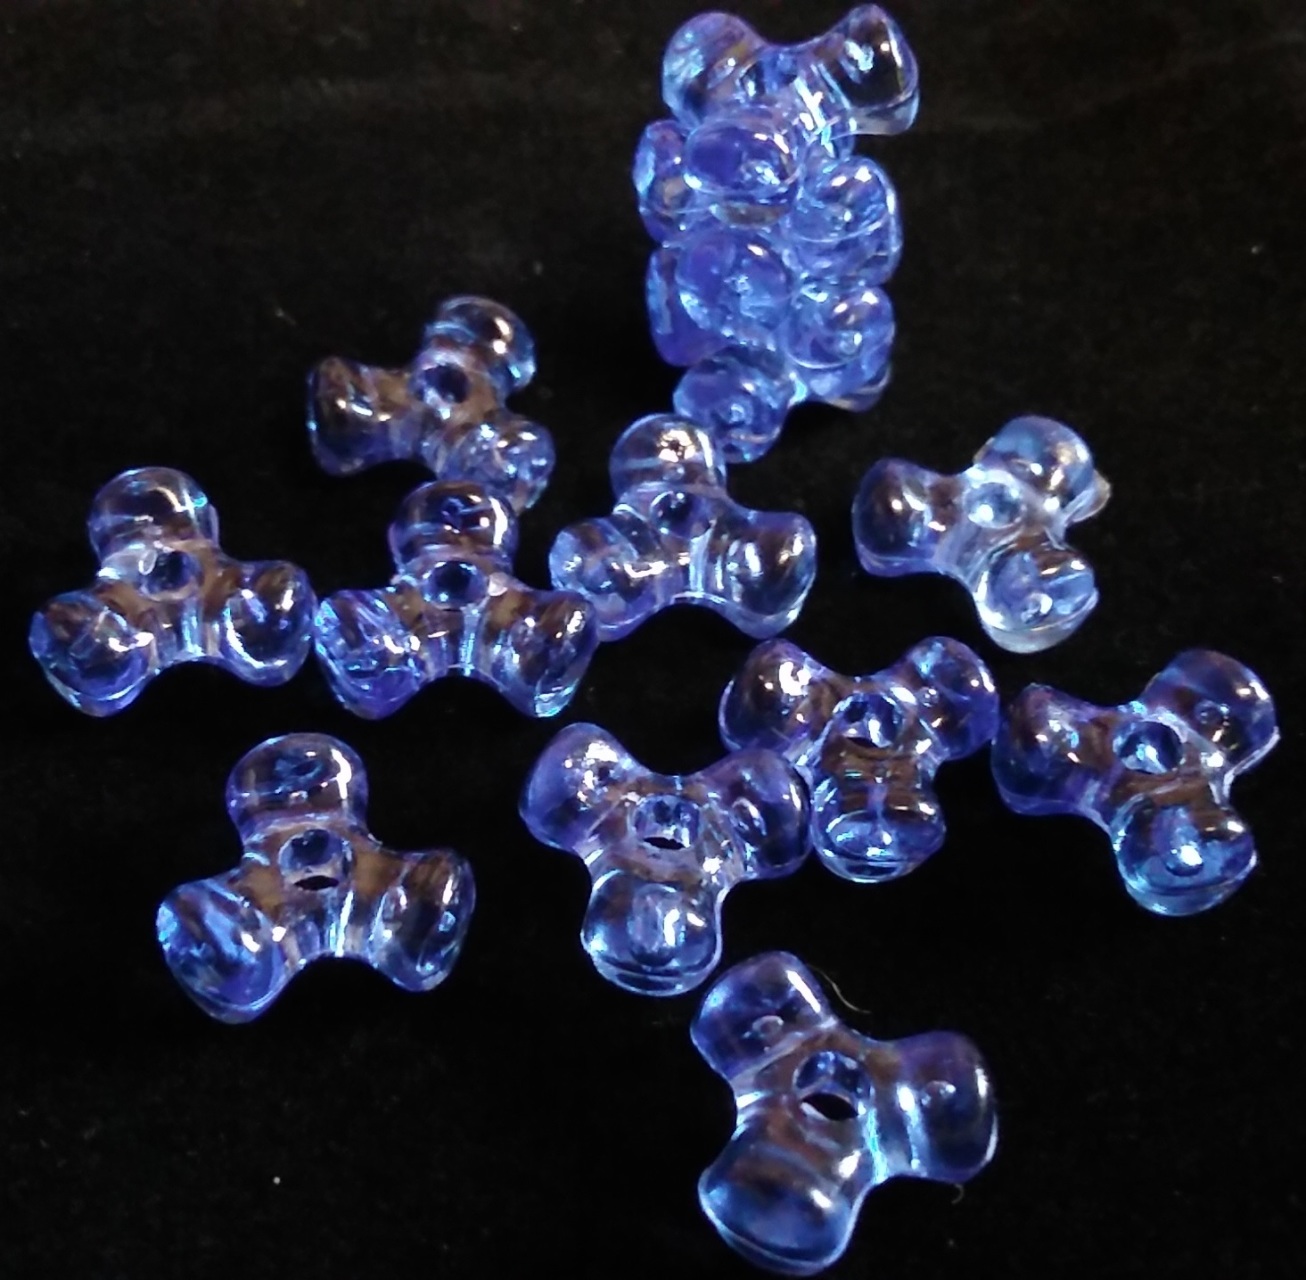 Faceted Plastic Beads, Starflake Transparent, 18mm, 1000-pc, Clear